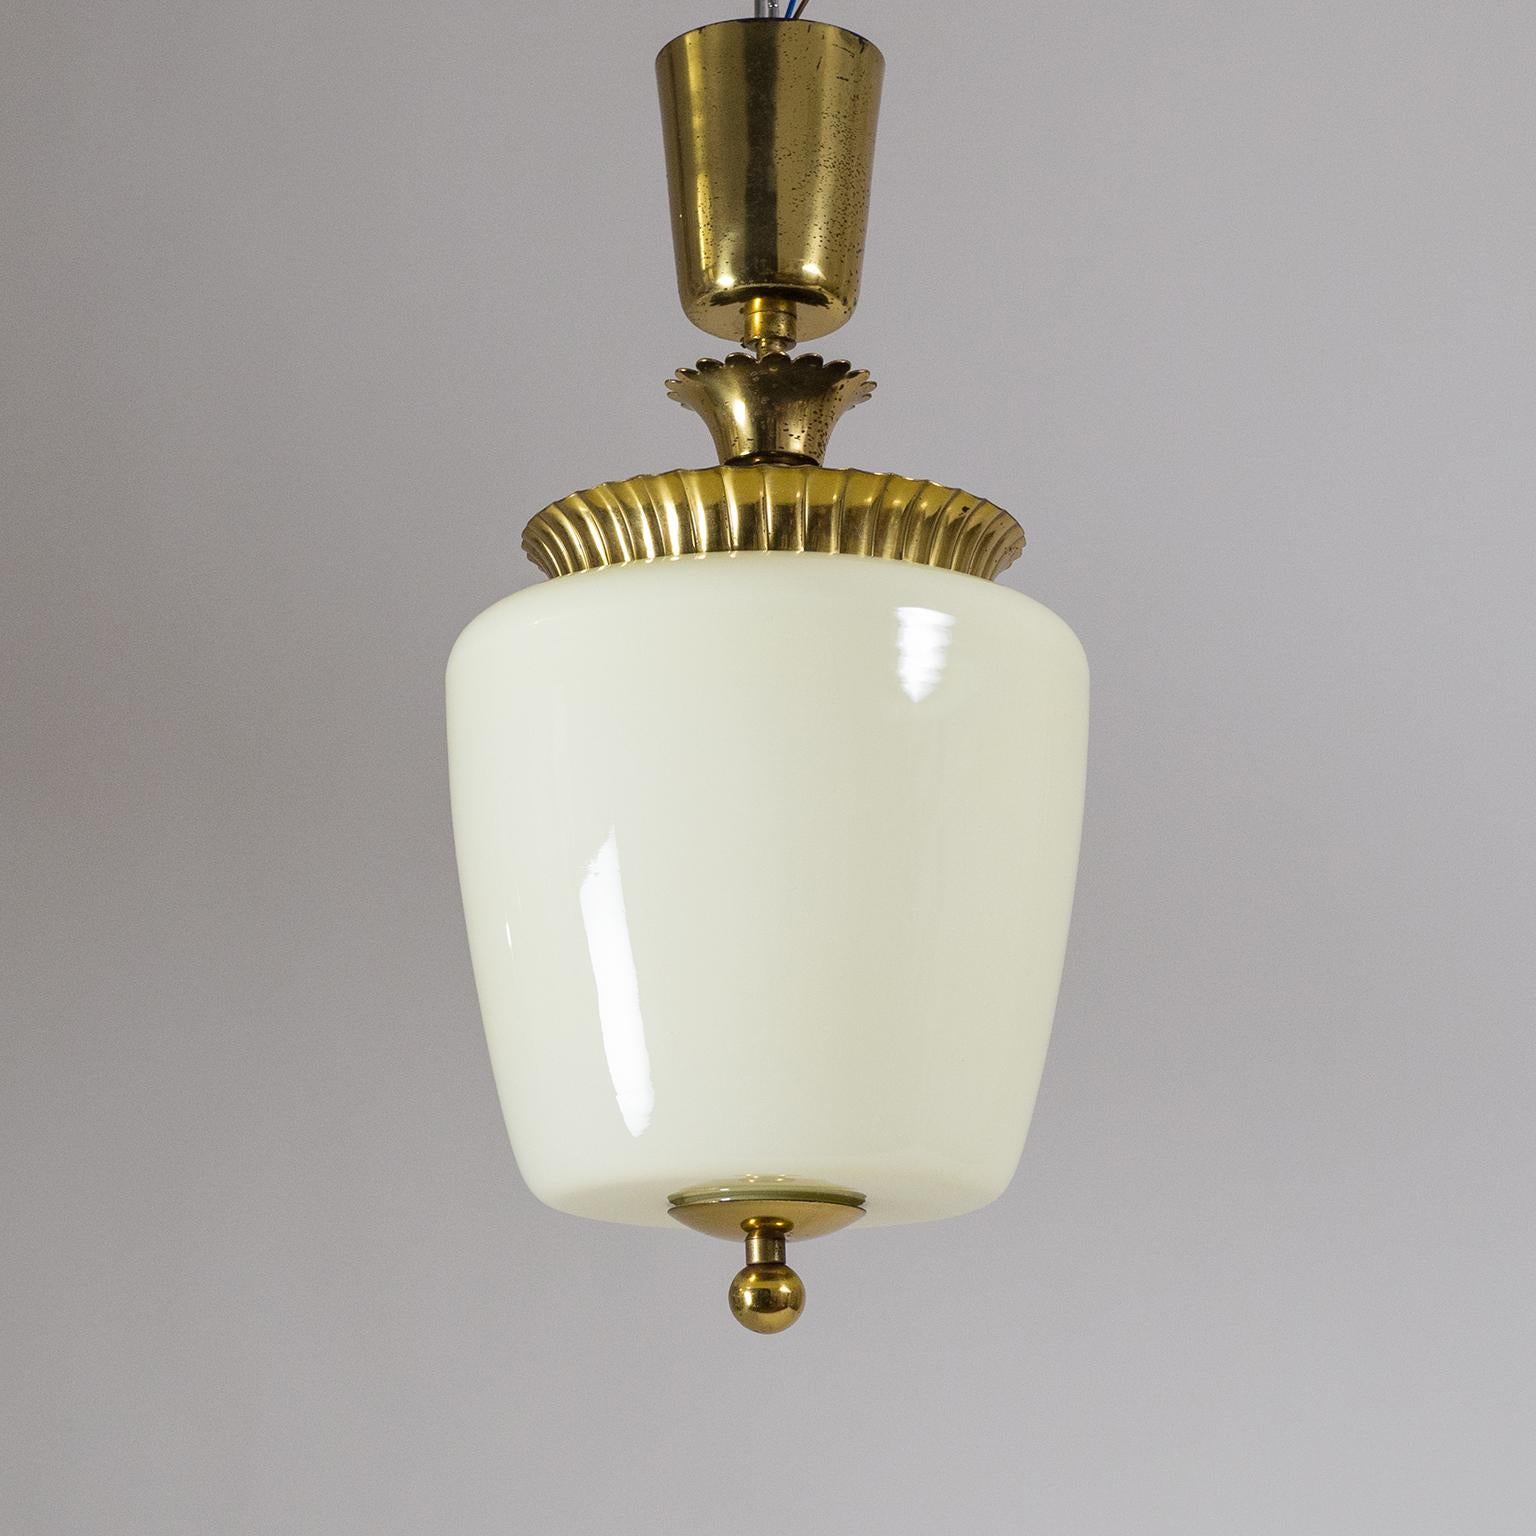 Lovely late Art Deco ceiling fixture from Austria, circa 1940. An ivory tinted blown glass body and tiered brass hardware with frilled and scalloped details. Very fine original condition with a nice patina on the brass. One original brass E27 socket